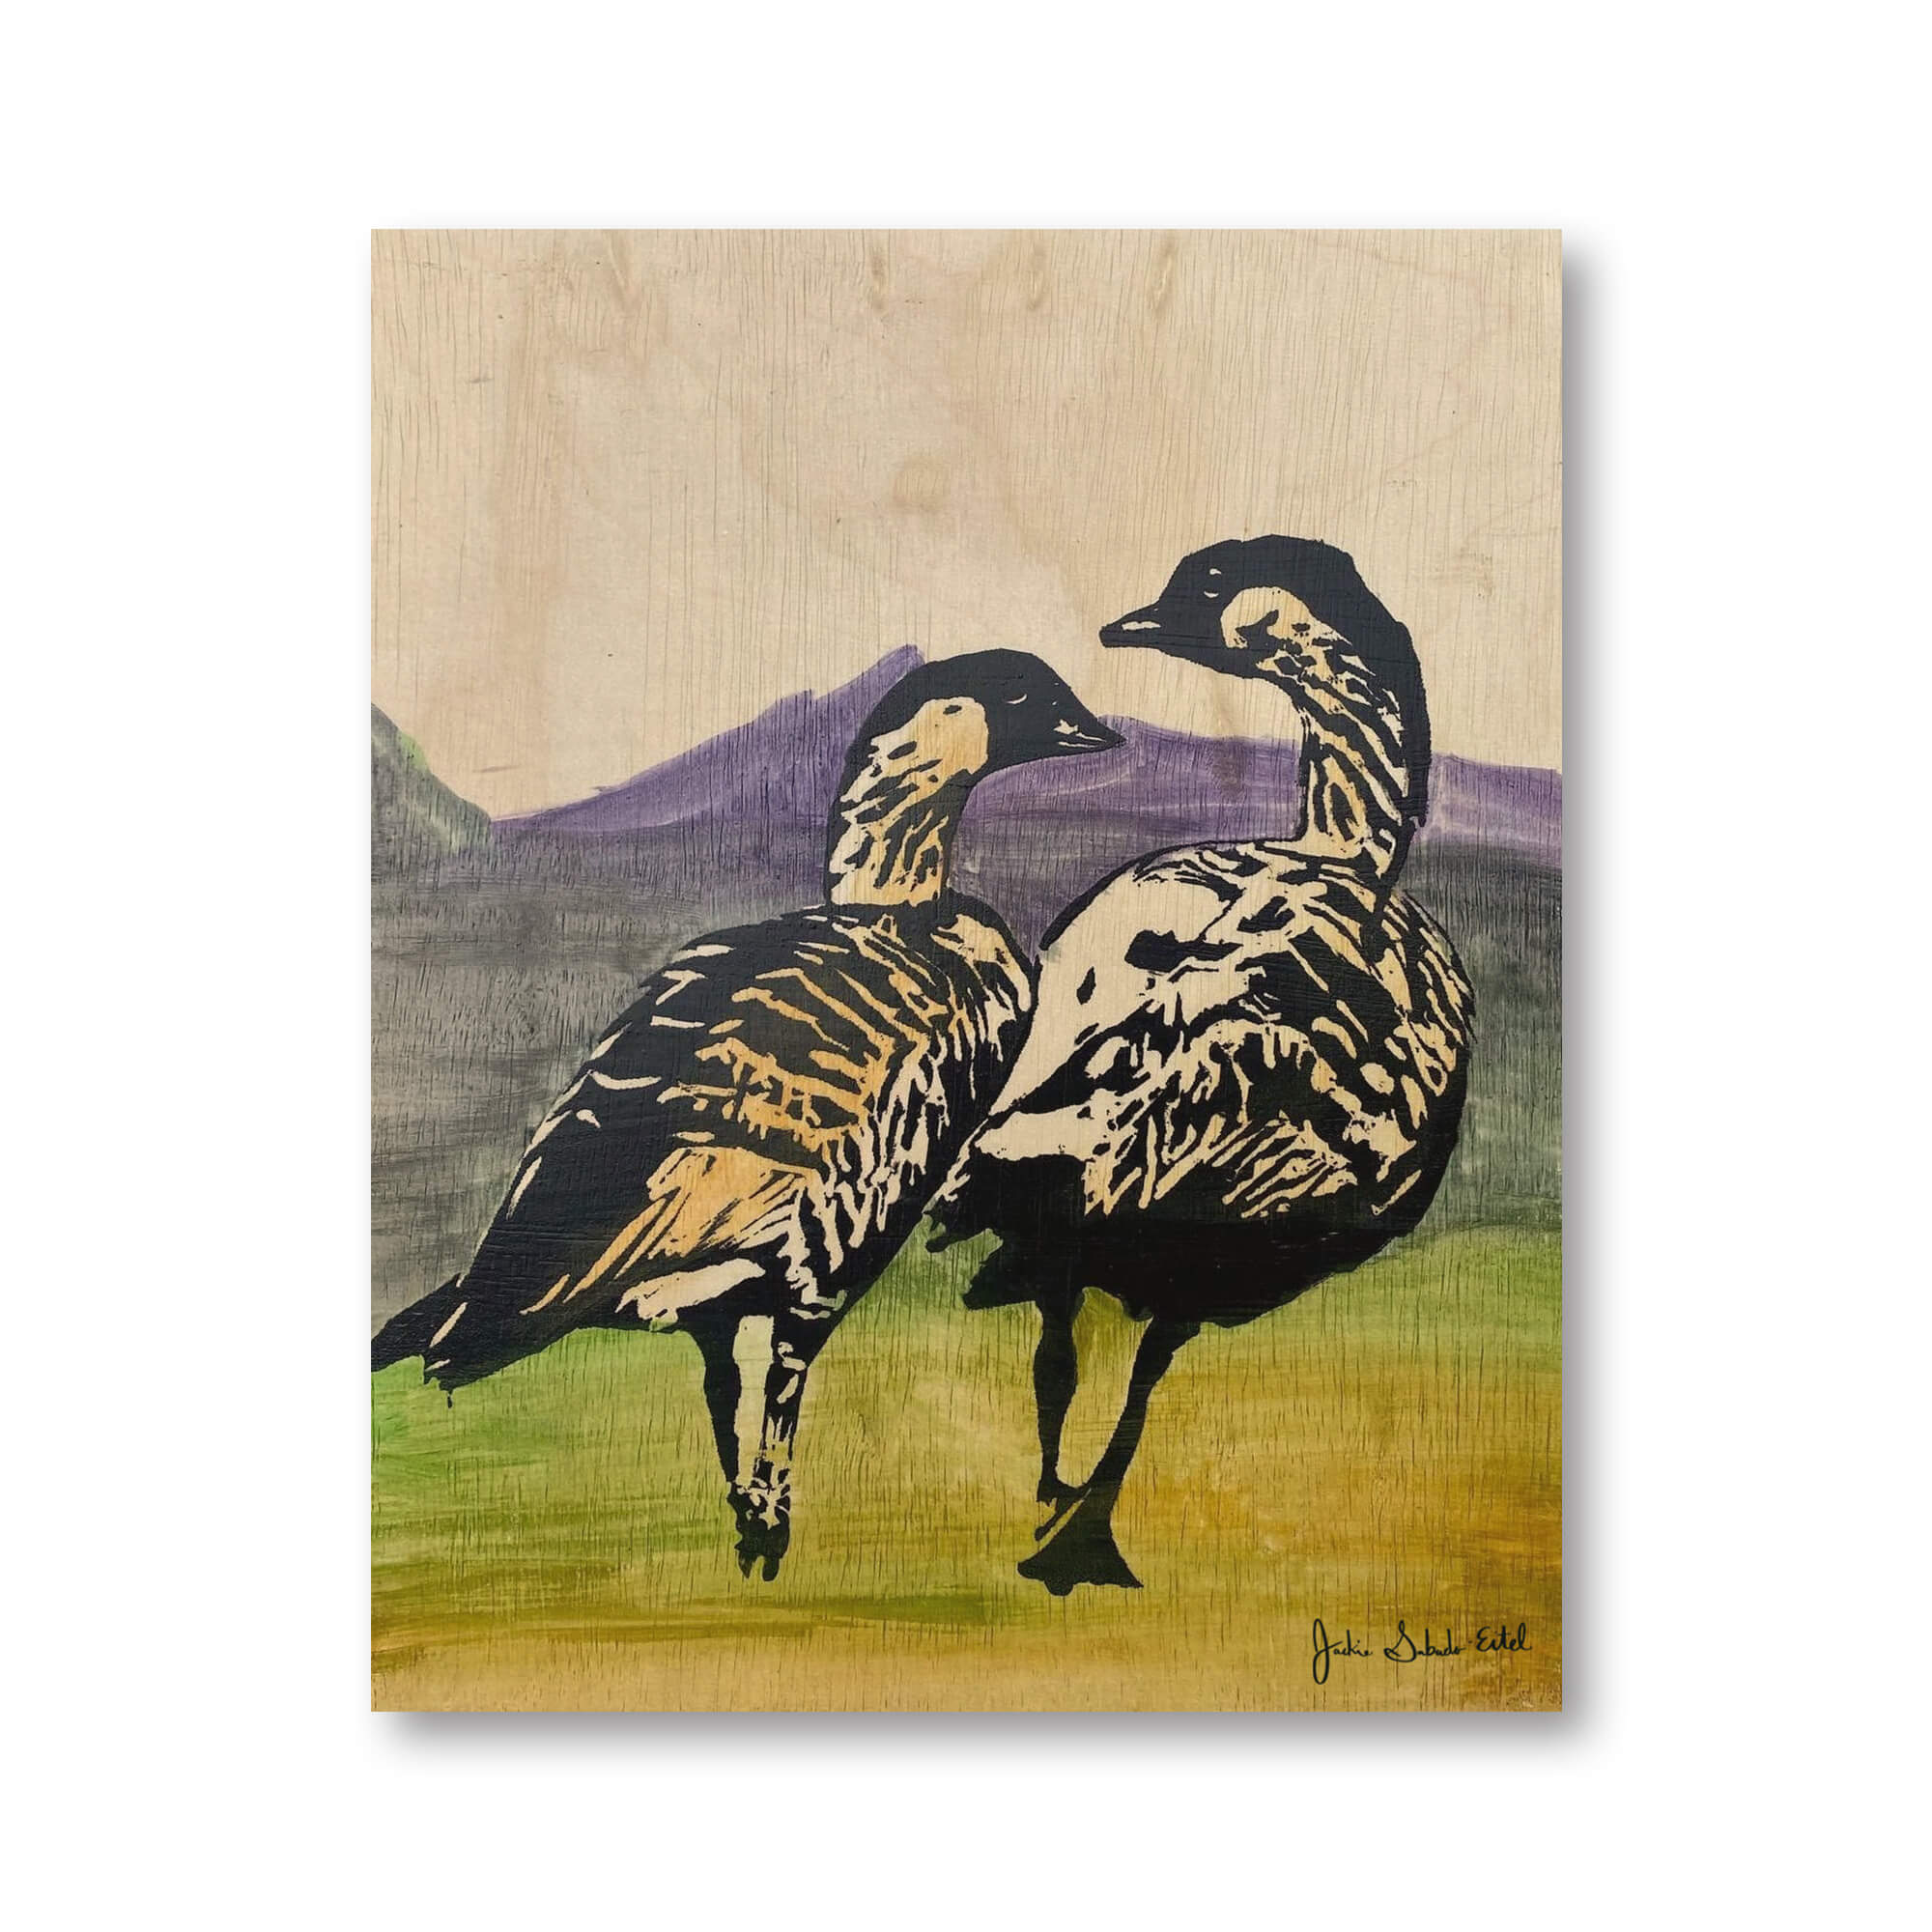 A wood print of two ducks walking while enjoying the colorful landscapes of Hawaii by Hawaii artist Jackie Eitel